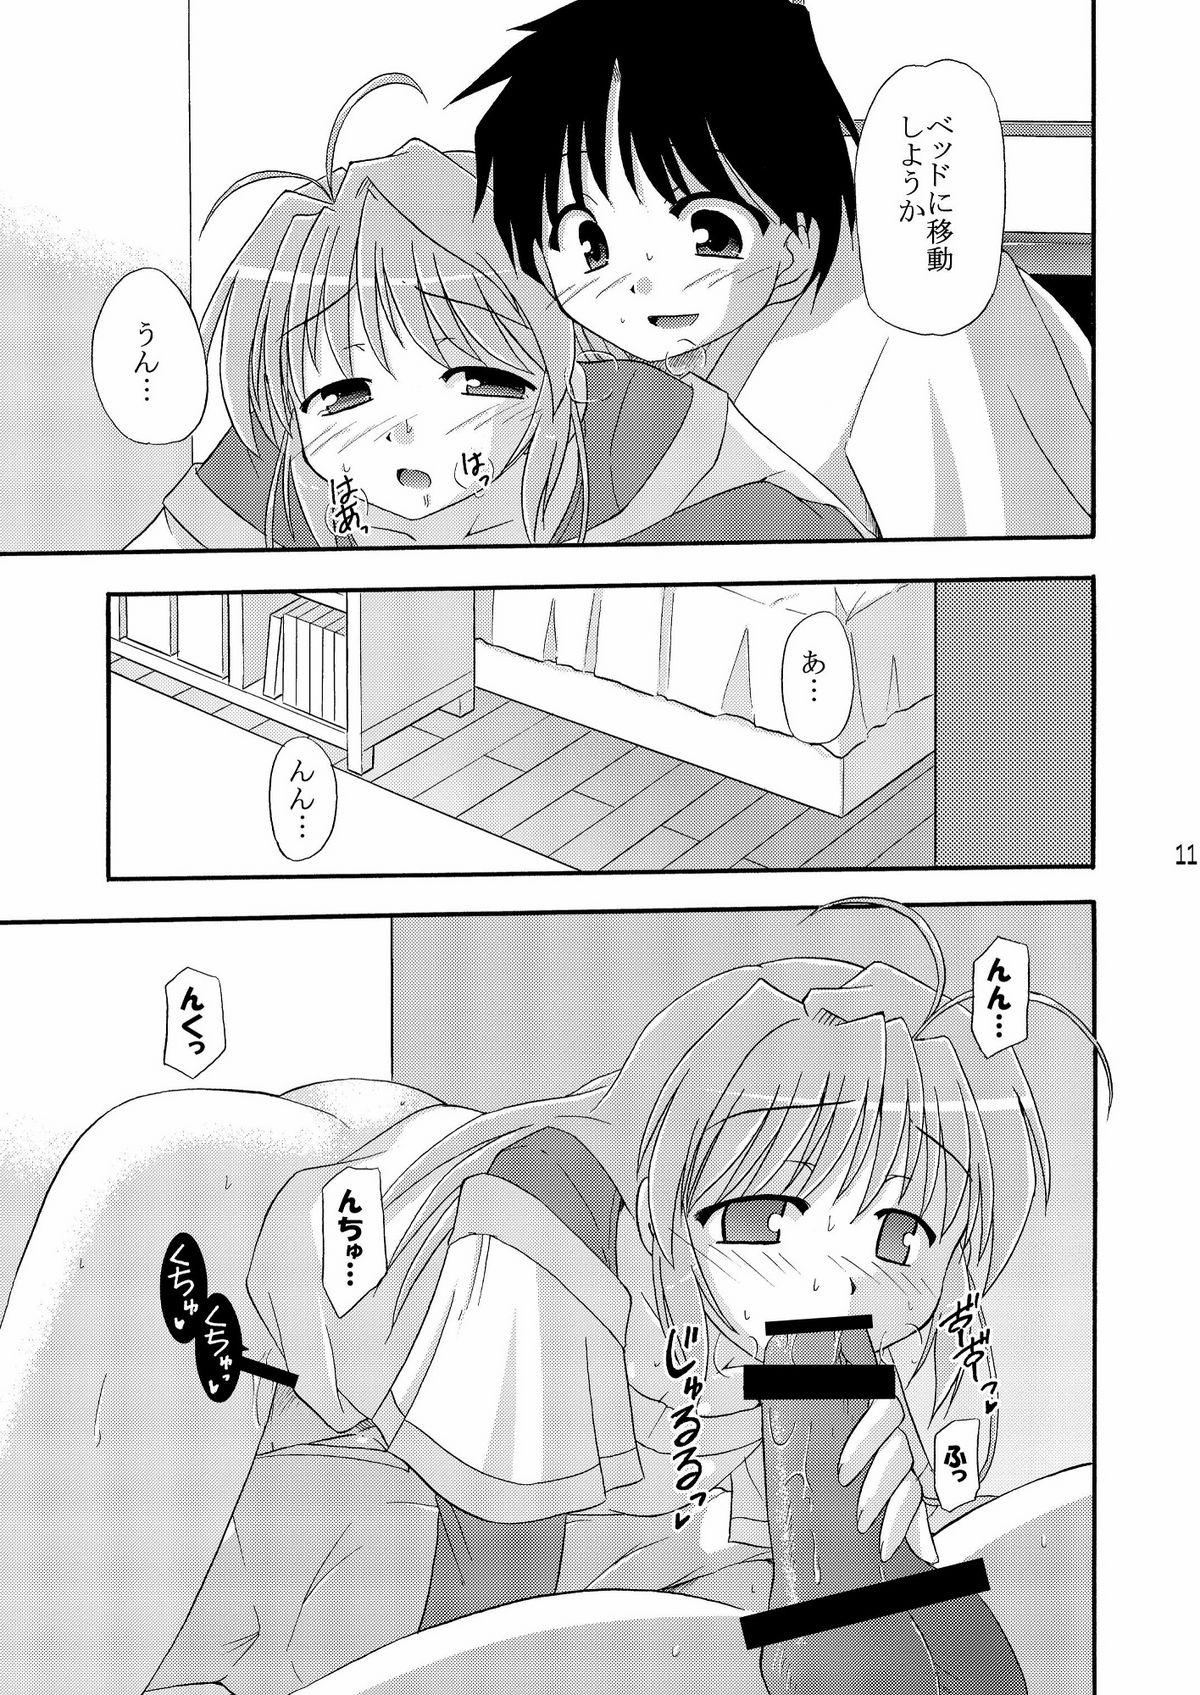 Blowjob Birthplace of tears - Fortune arterial Viet - Page 13